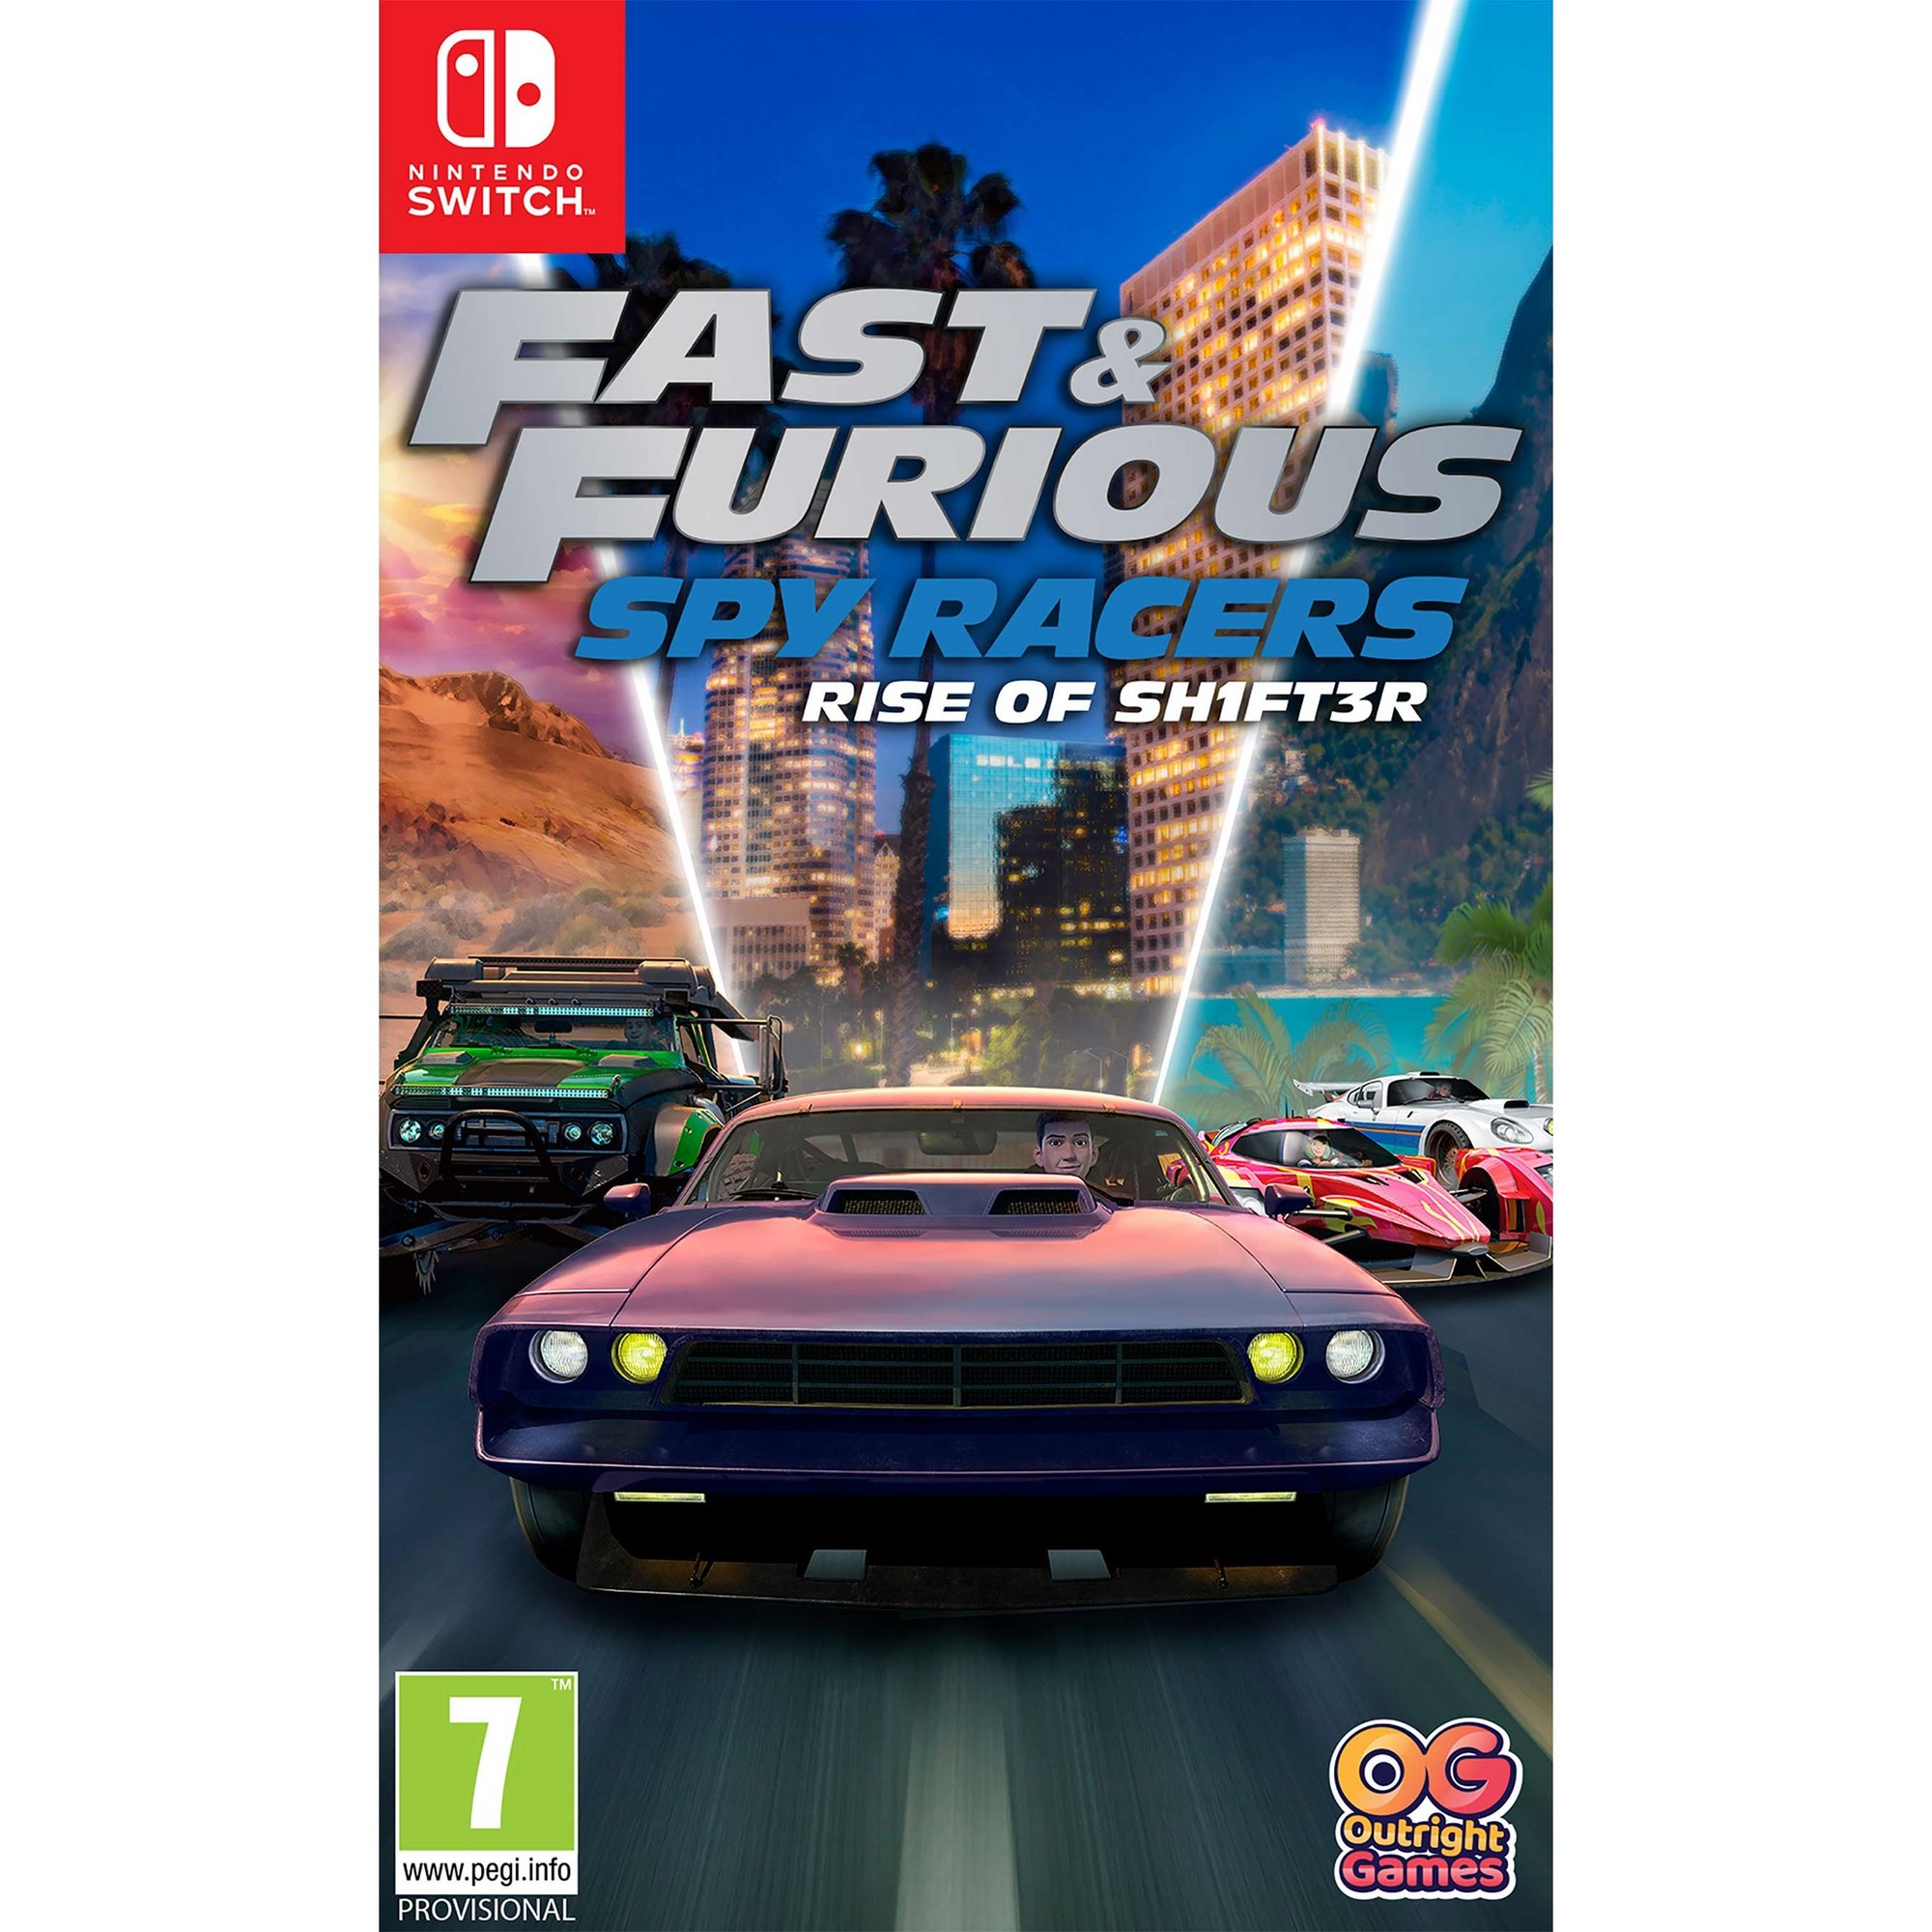 Nintendo Switch: Fast and Furious Spy Racers Rise Of SH1FT3R